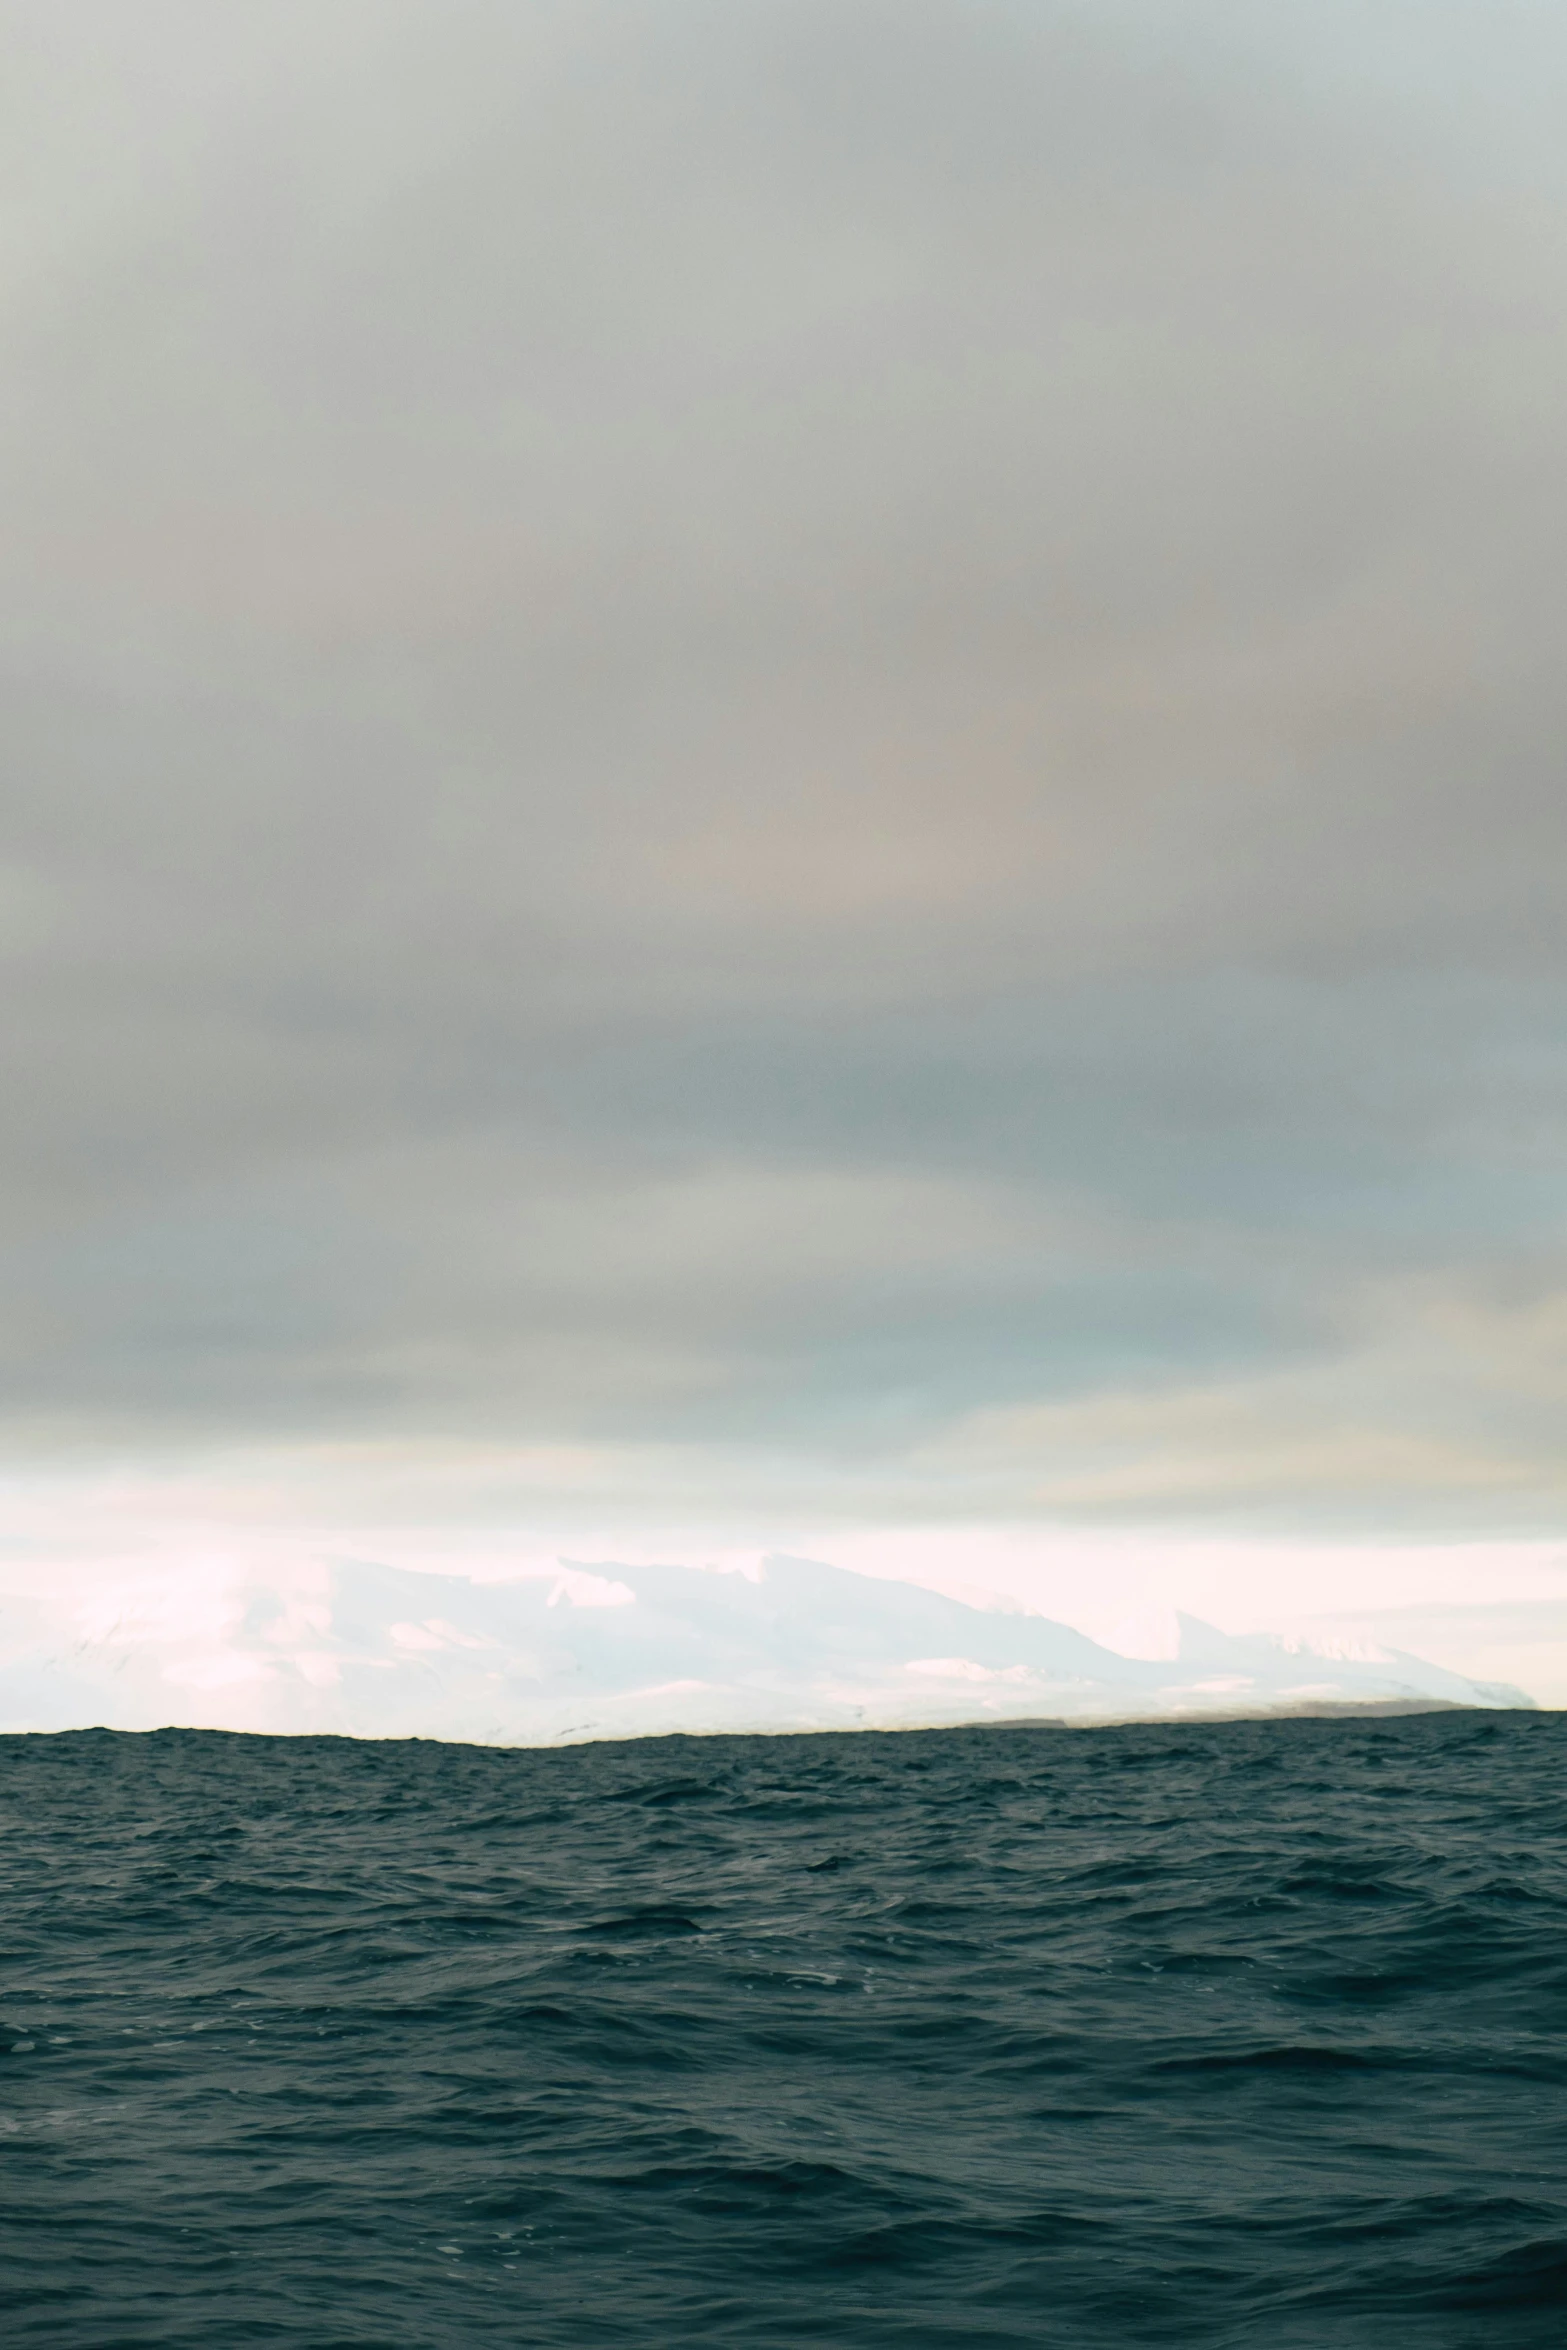 a man riding a surfboard on top of a wave, an album cover, unsplash, minimalism, brooding clouds, panorama, photo taken from a boat, skye meaker